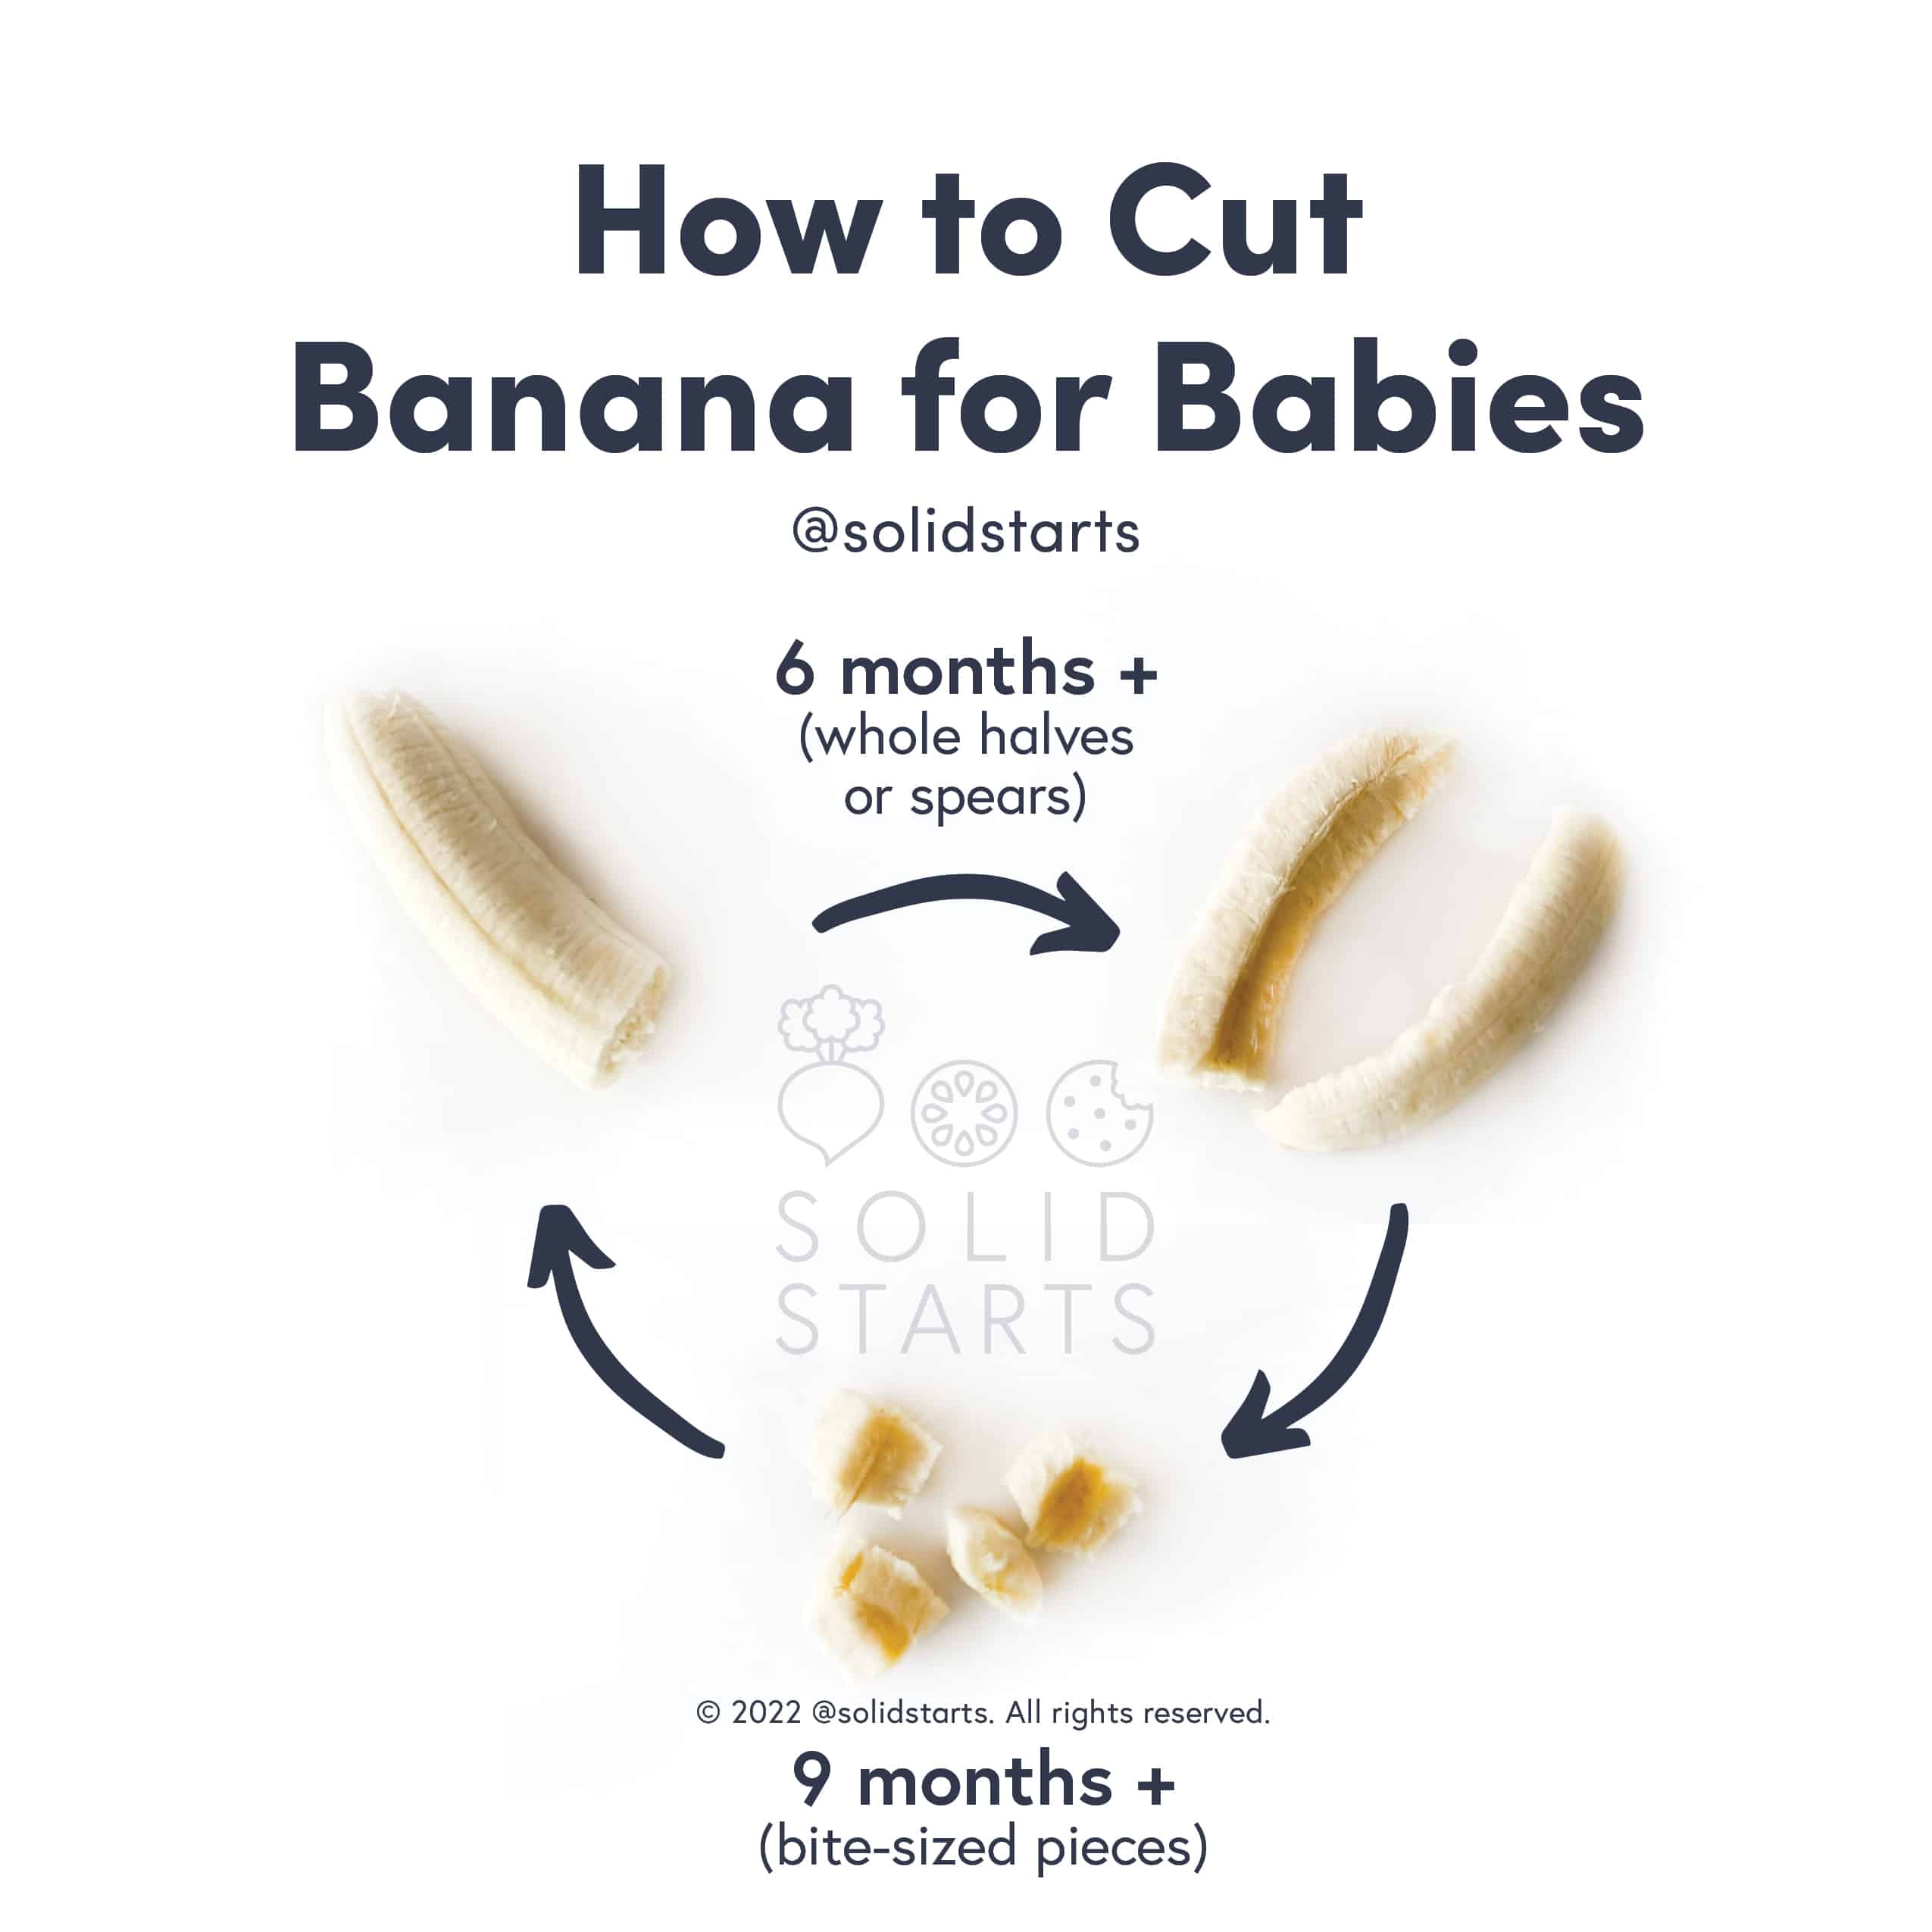 Bananas for Babies When Can Babies Eat Bananas? Solid Starts